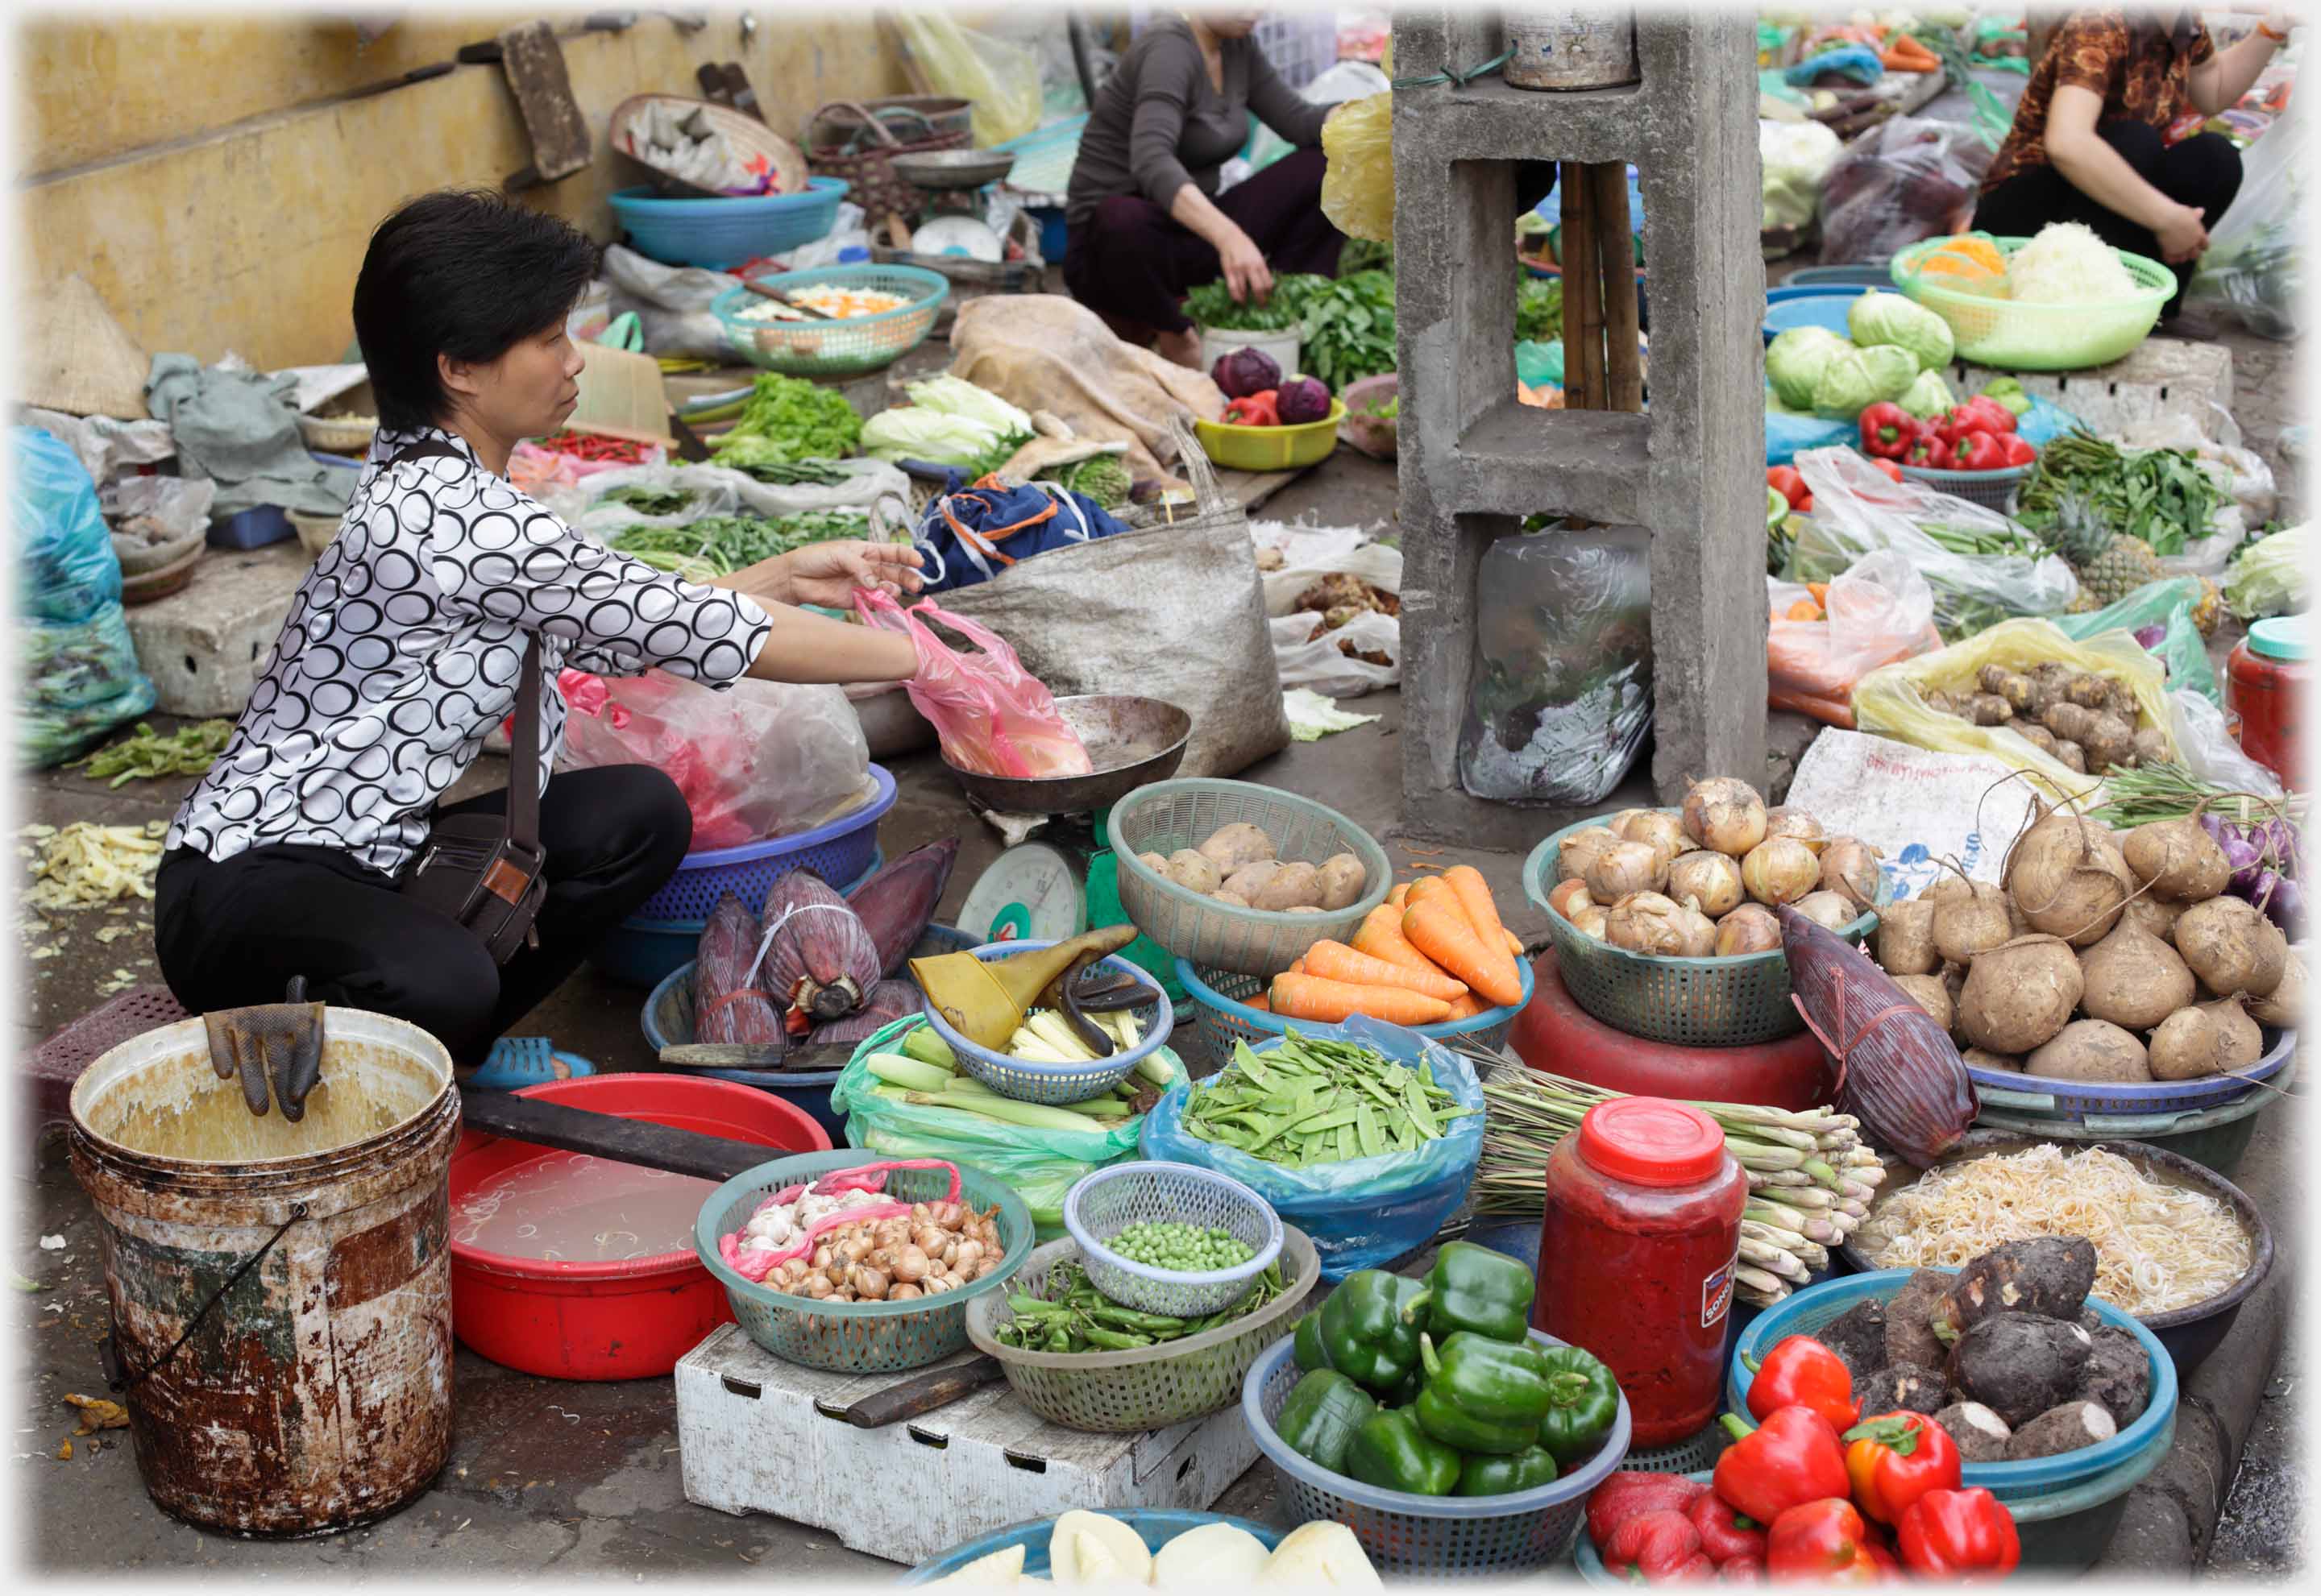 Woman with many bowls of sifferent vegetables arranged in front of her.